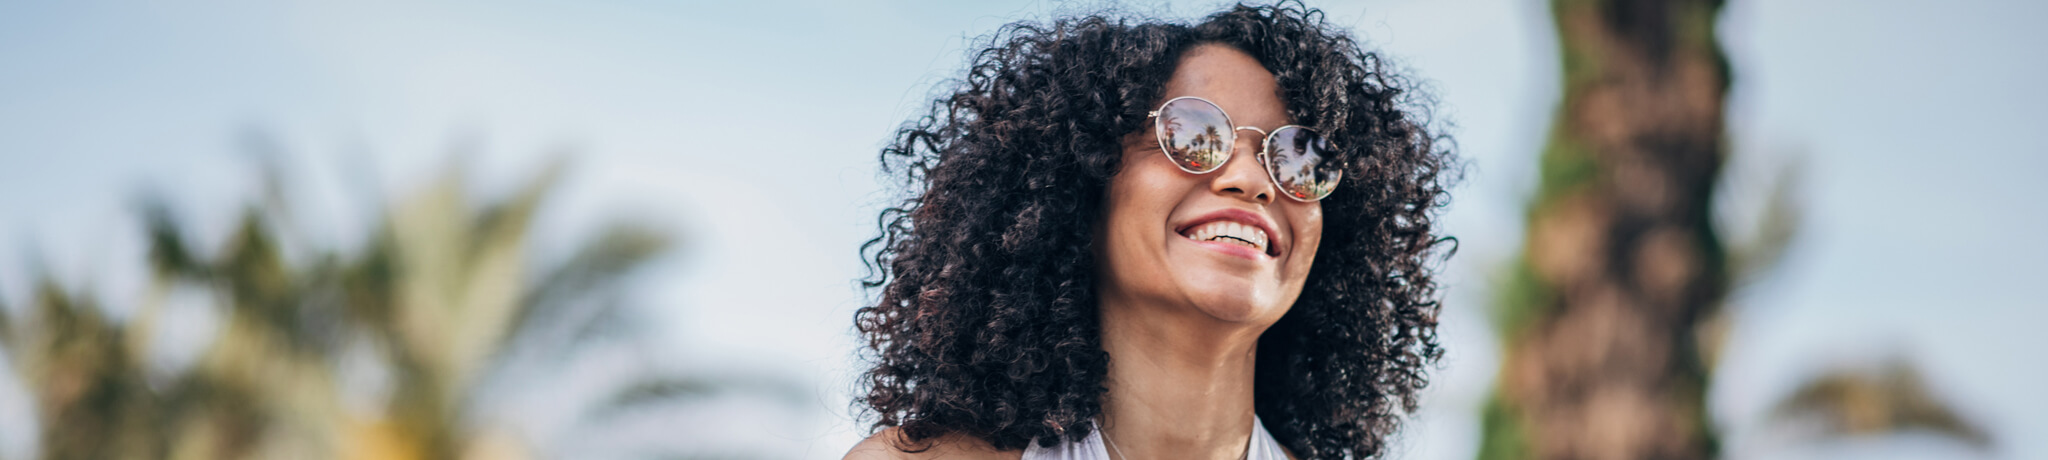 Woman with sunglasses smiling